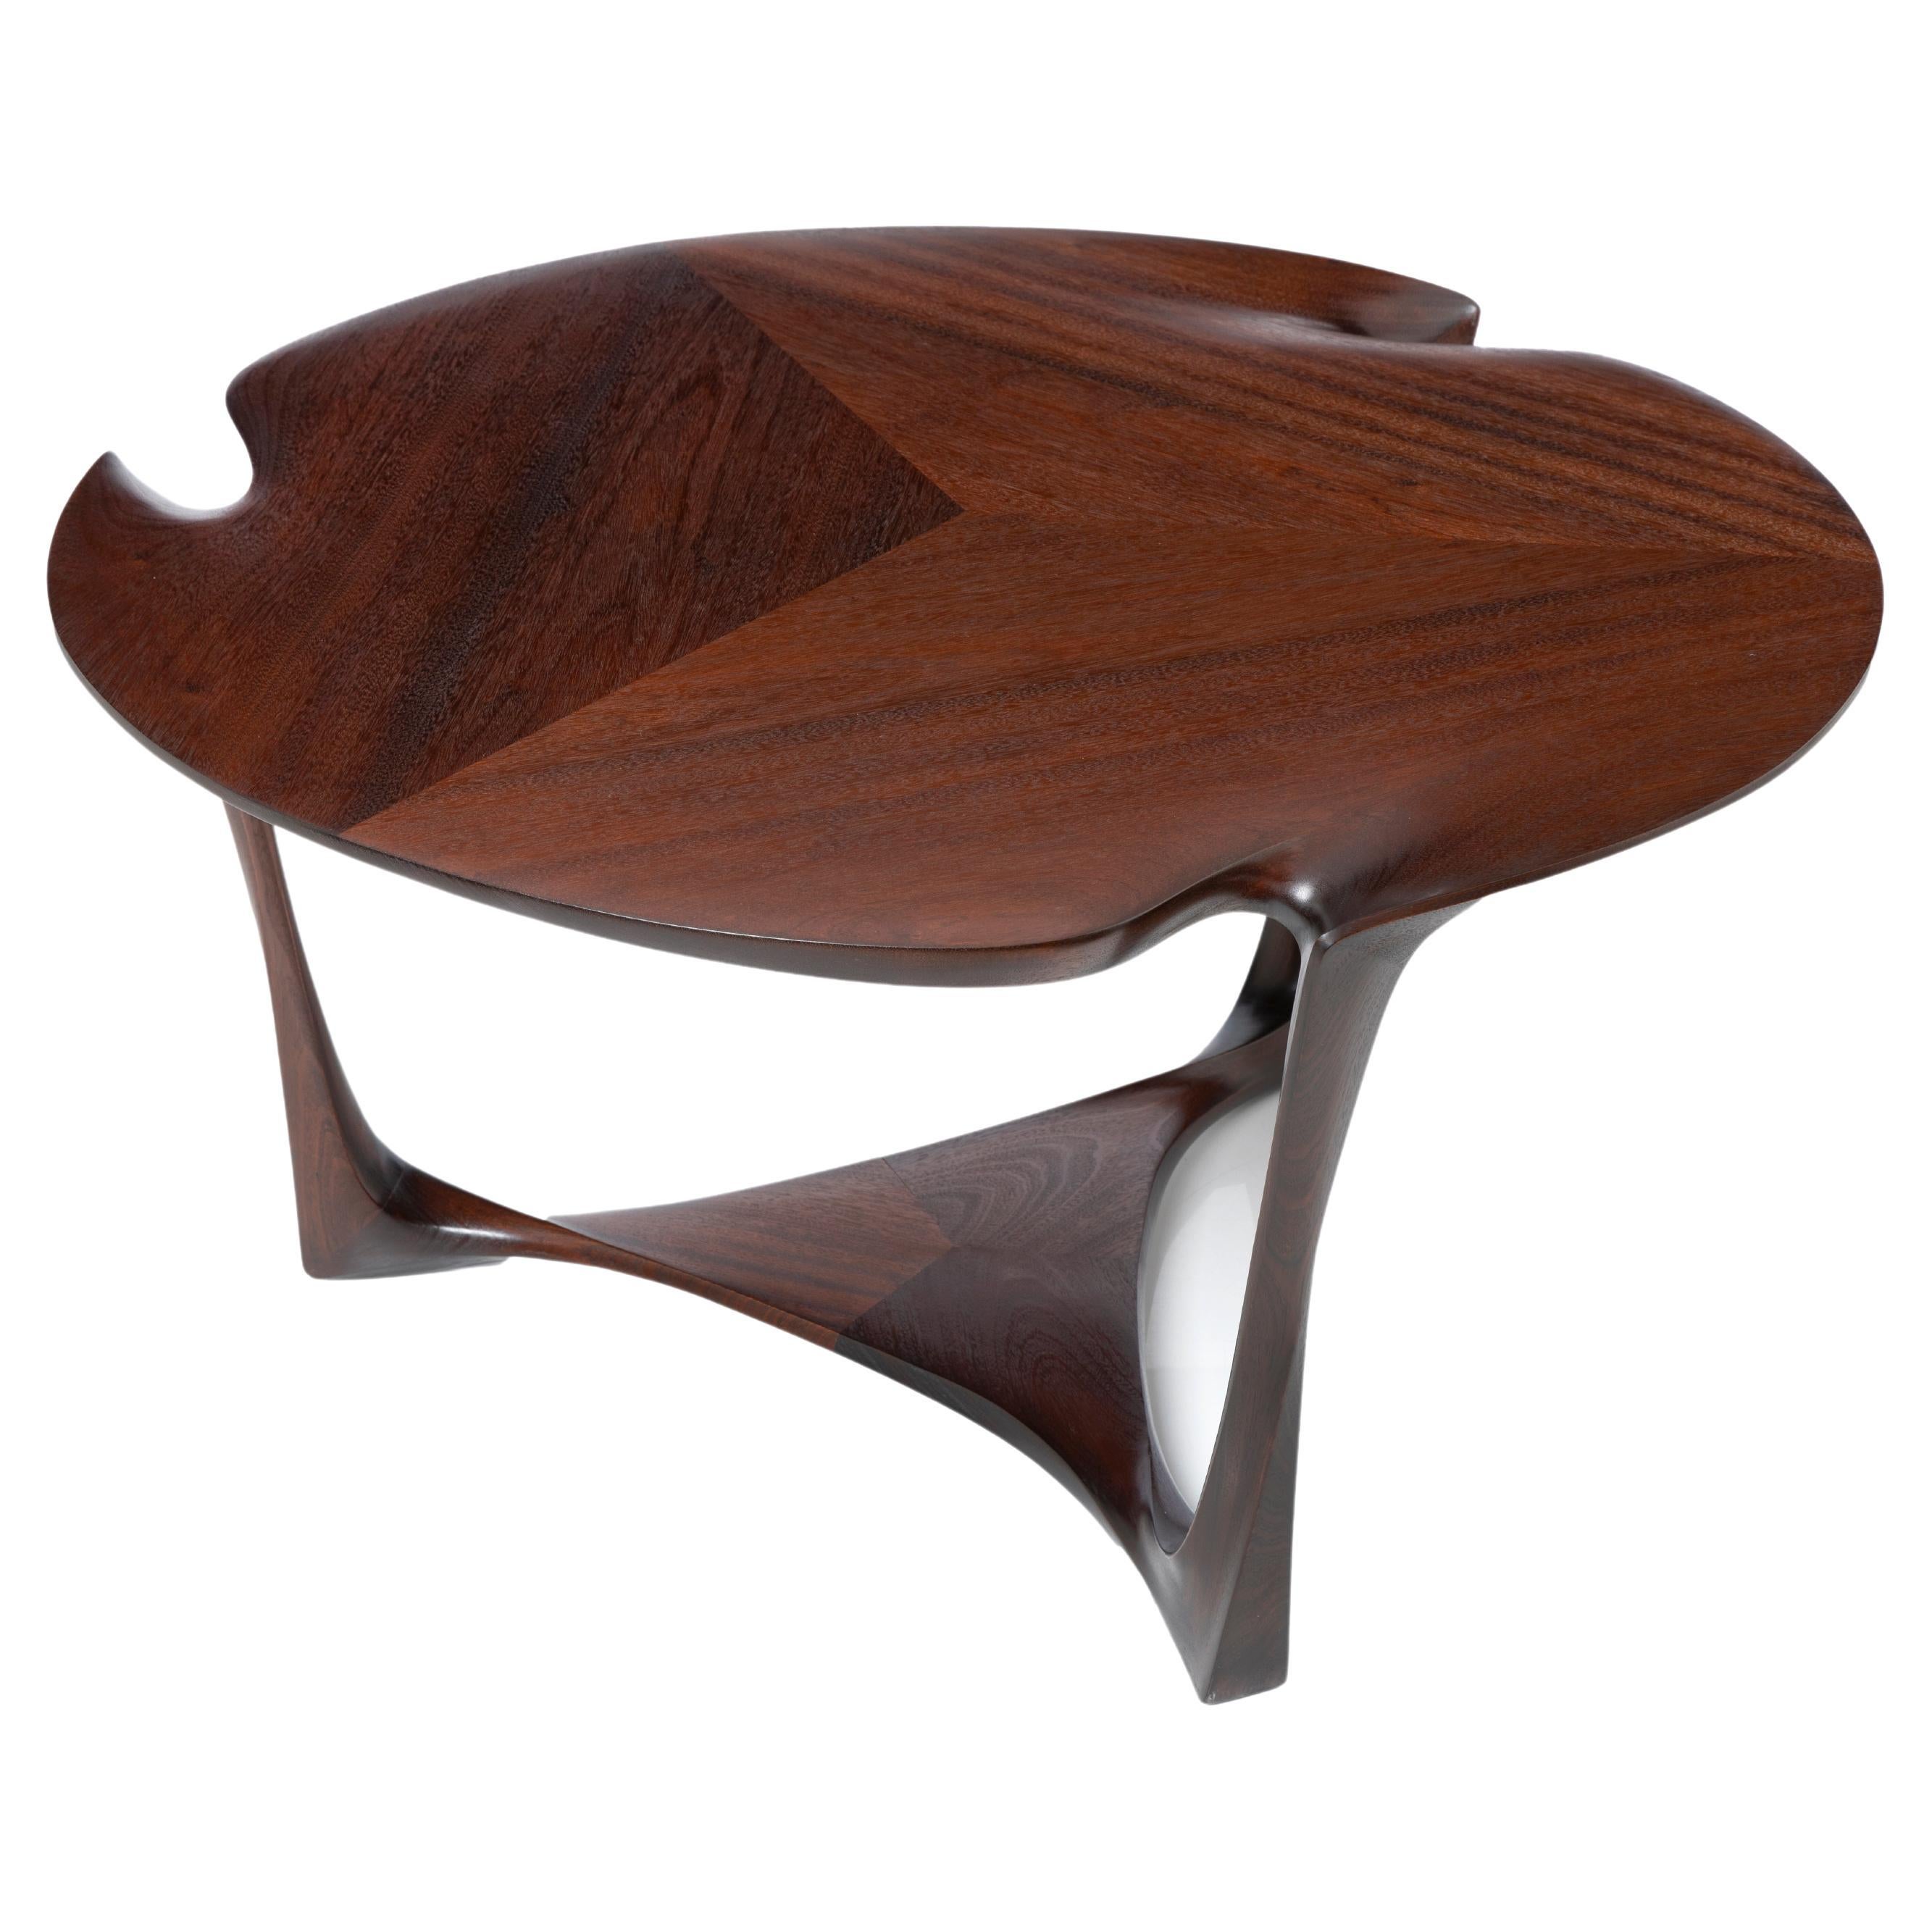 ANTONI TABLE A Modern take on Art Nouveau. Sloping legs, Carved, Collectible. For Sale